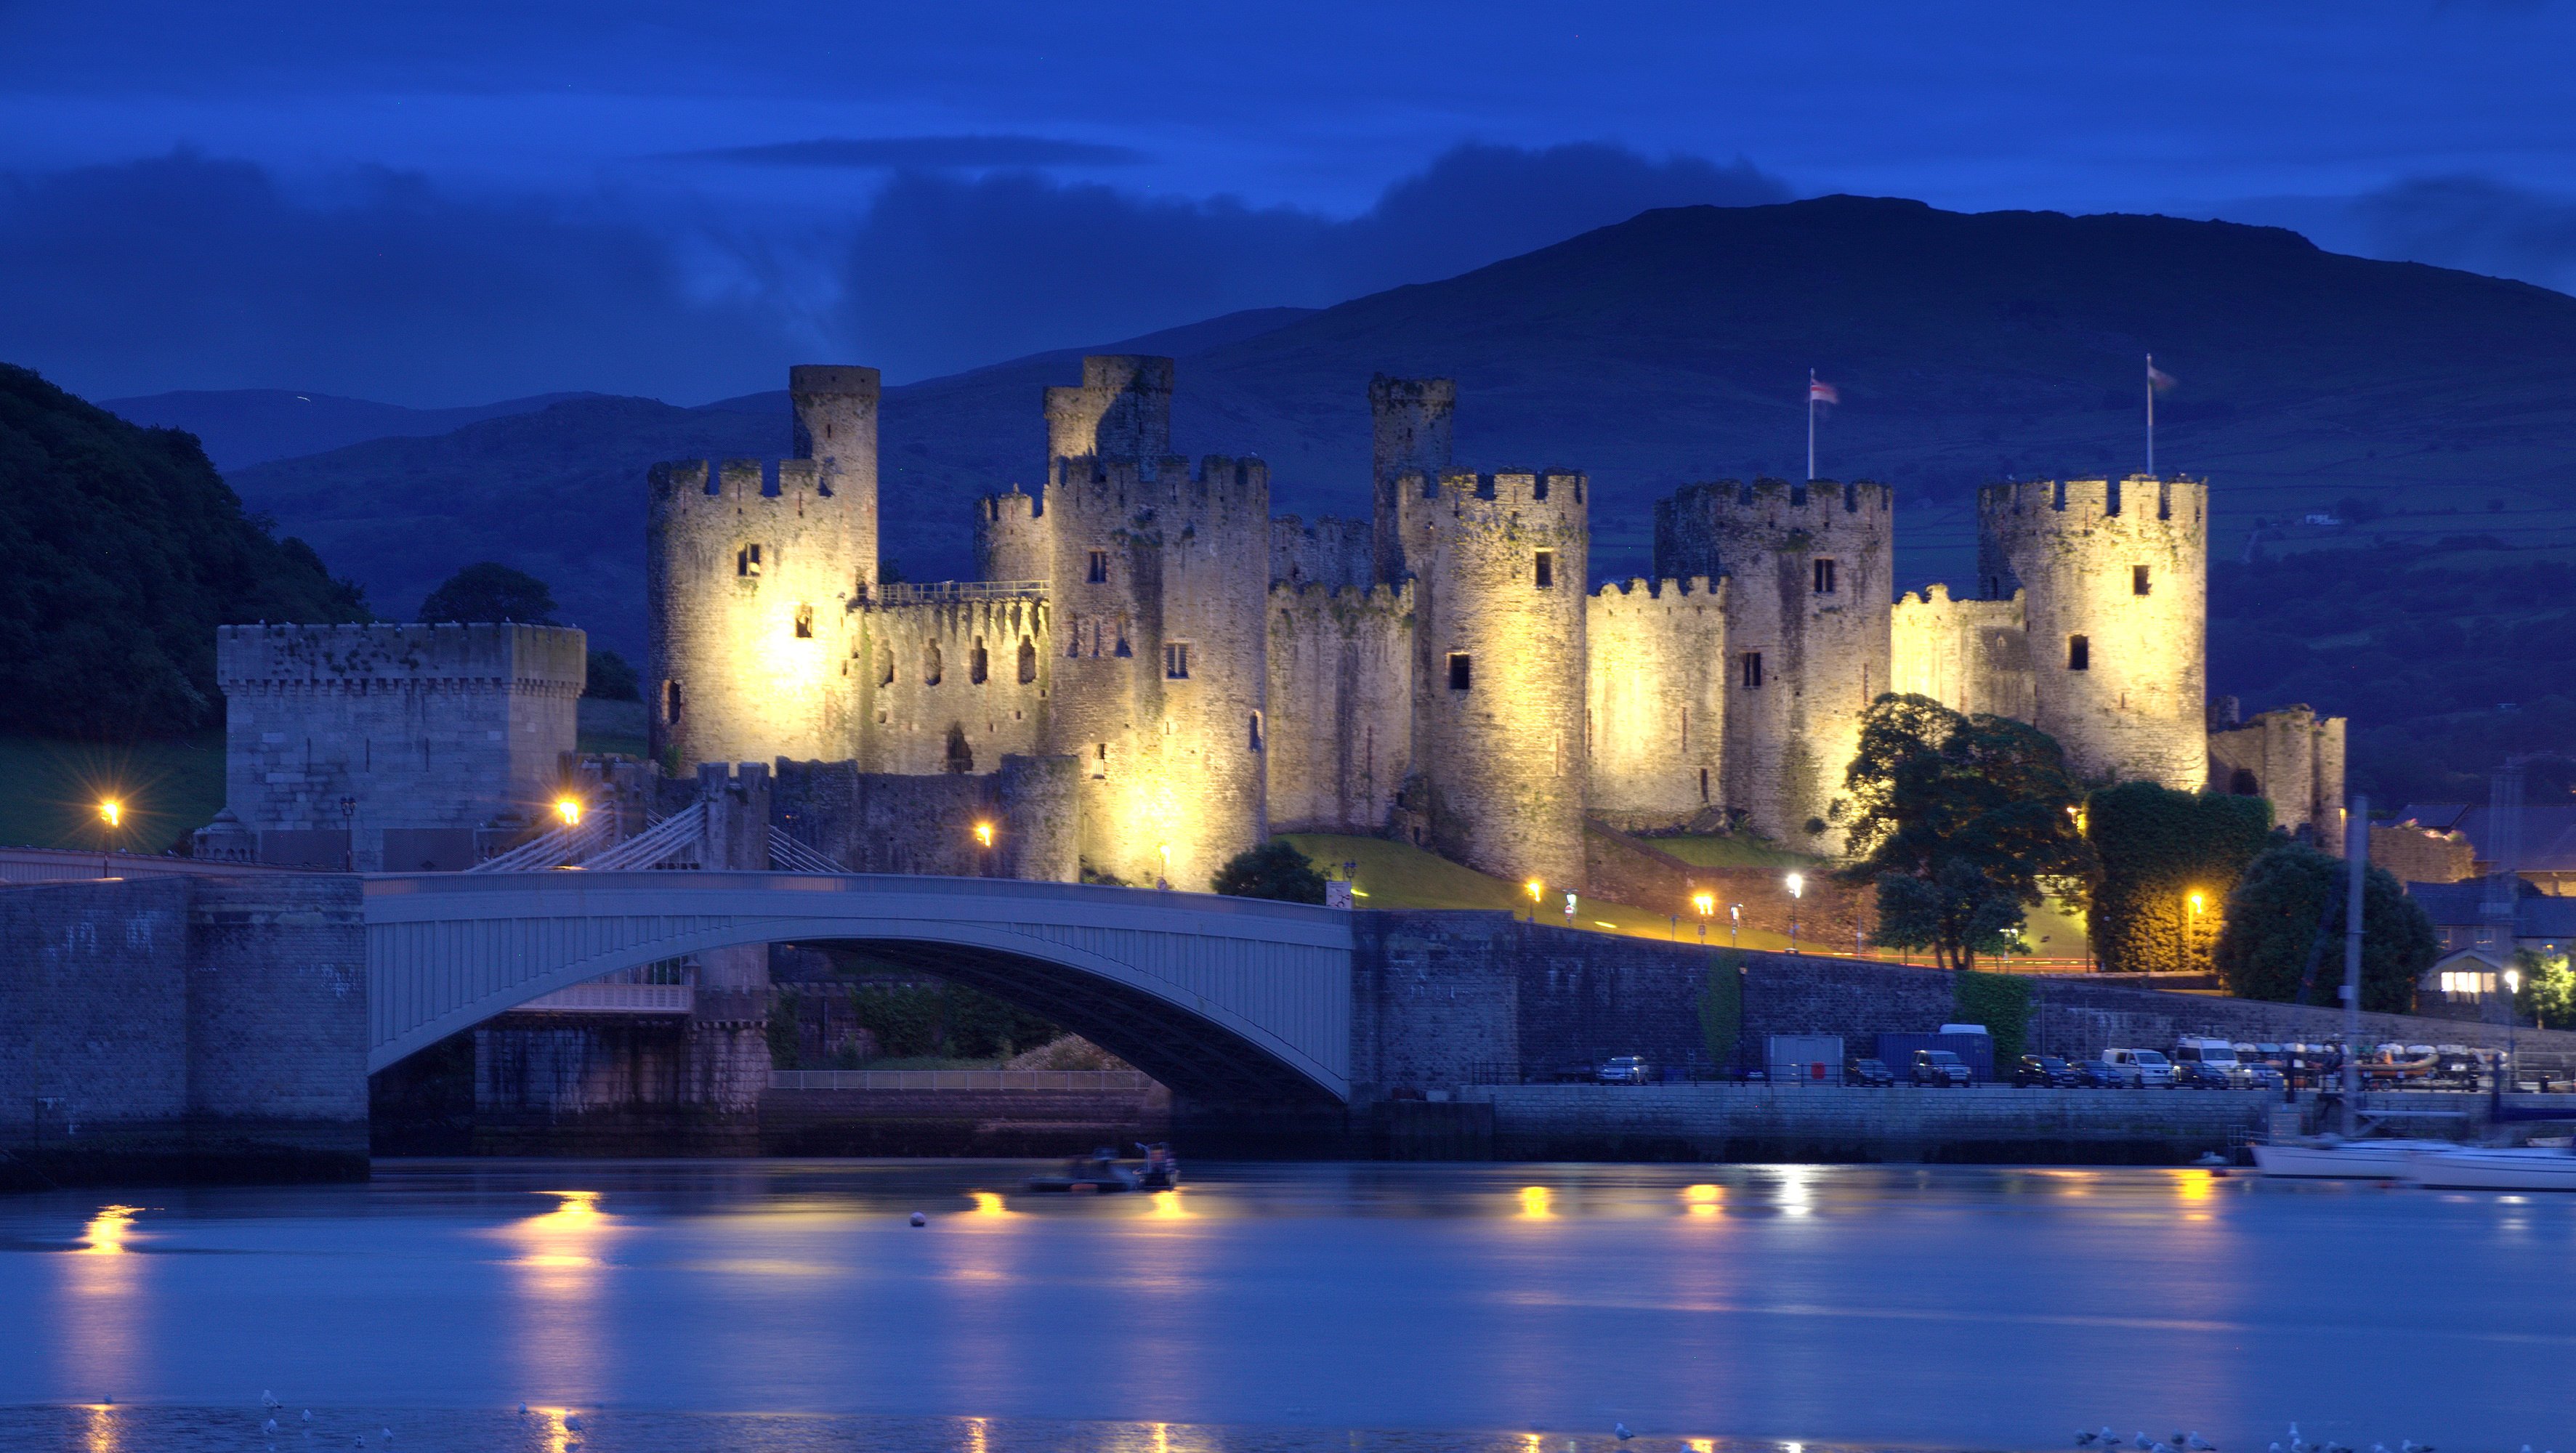 england, Conwy, Castle, North, Wales, England, North, Wales, Castle, Fortress, Bridge, River, Mountain, Night, Evening, Lights, Landscape Wallpaper